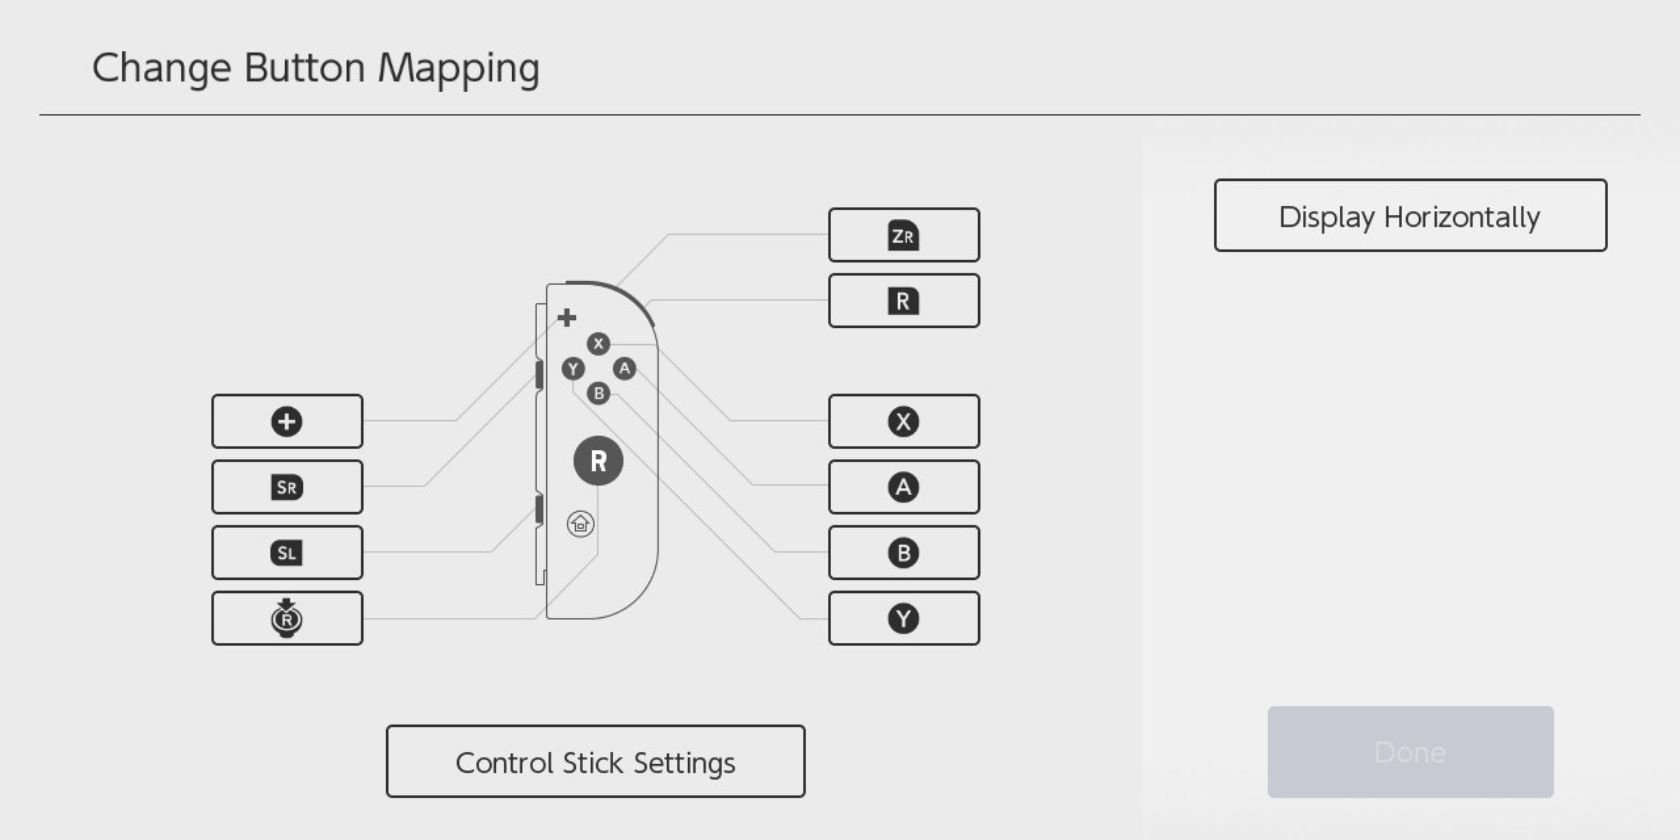 The Change Button Mapping screen on the Nintendo Switch in light mode